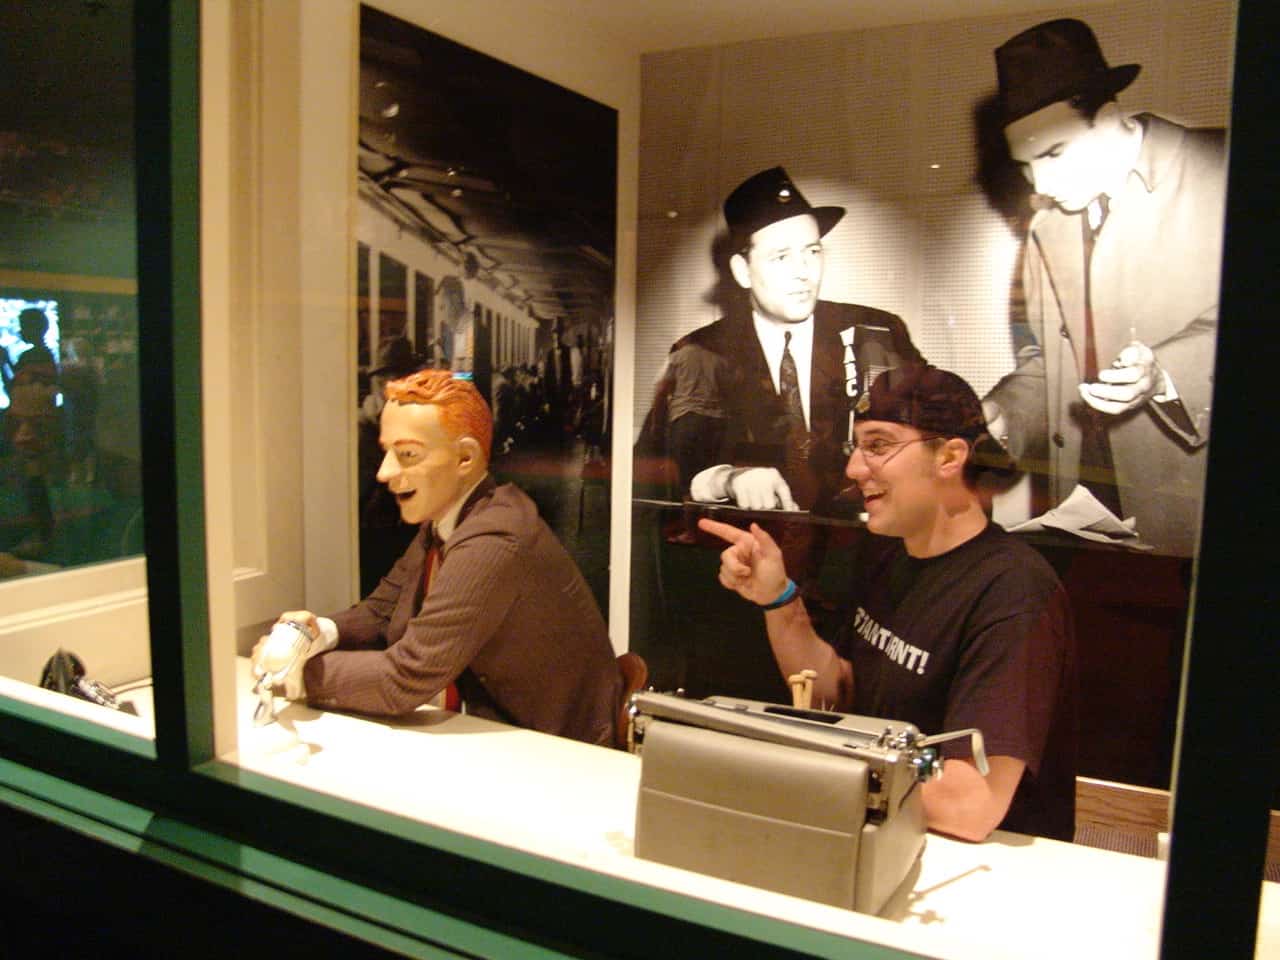 In the broadcast booth at the Louisville Slugger Museum in Louisville, Kentucky